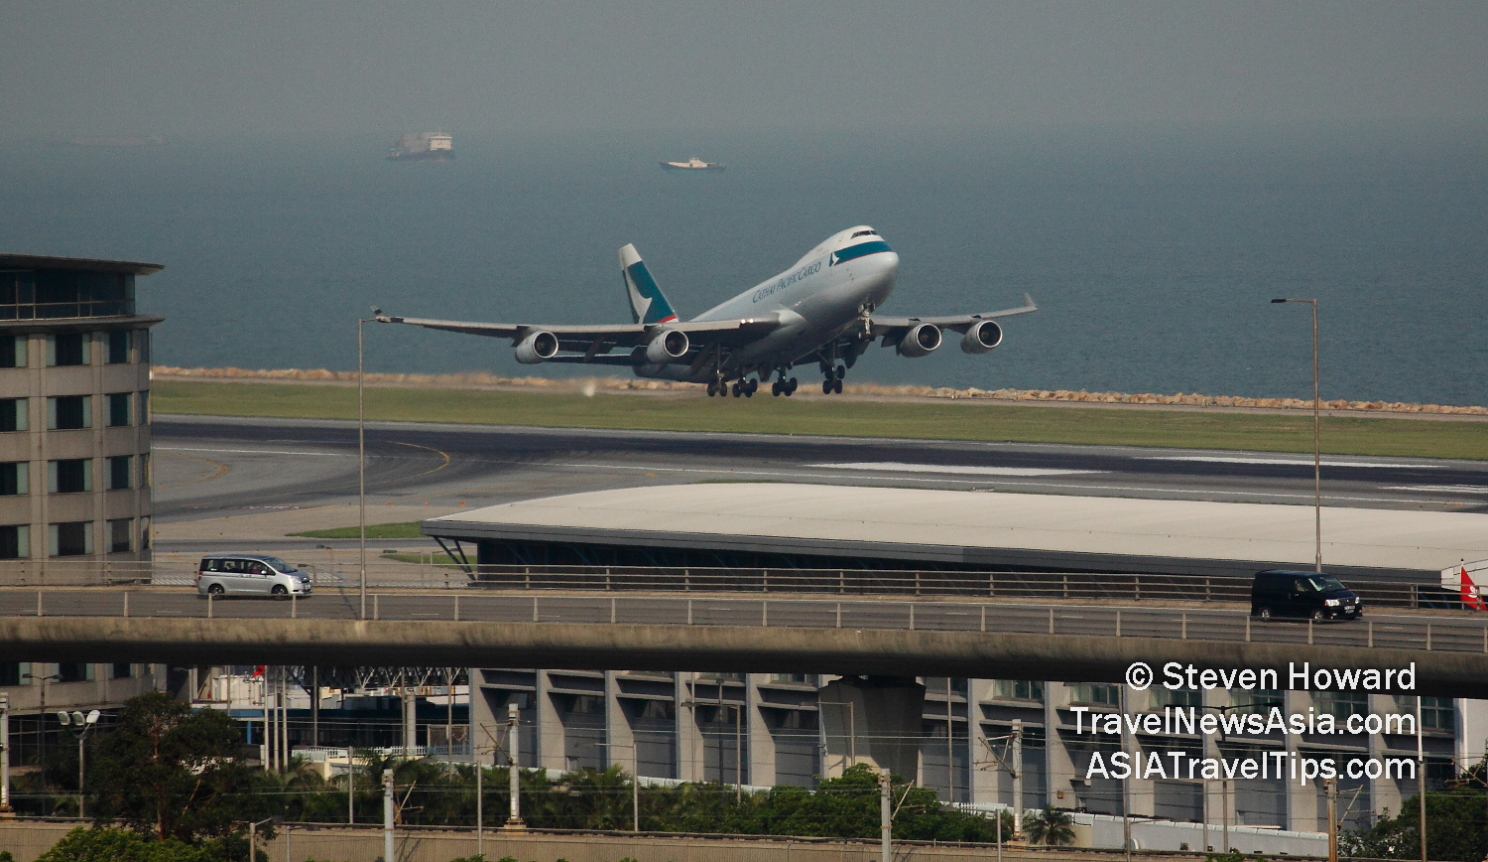 Cathay Pacific Cargo Boeing 747F taking off from HKIA. Picture by Steven Howard of TravelNewsAsia.com Click to enlarge.